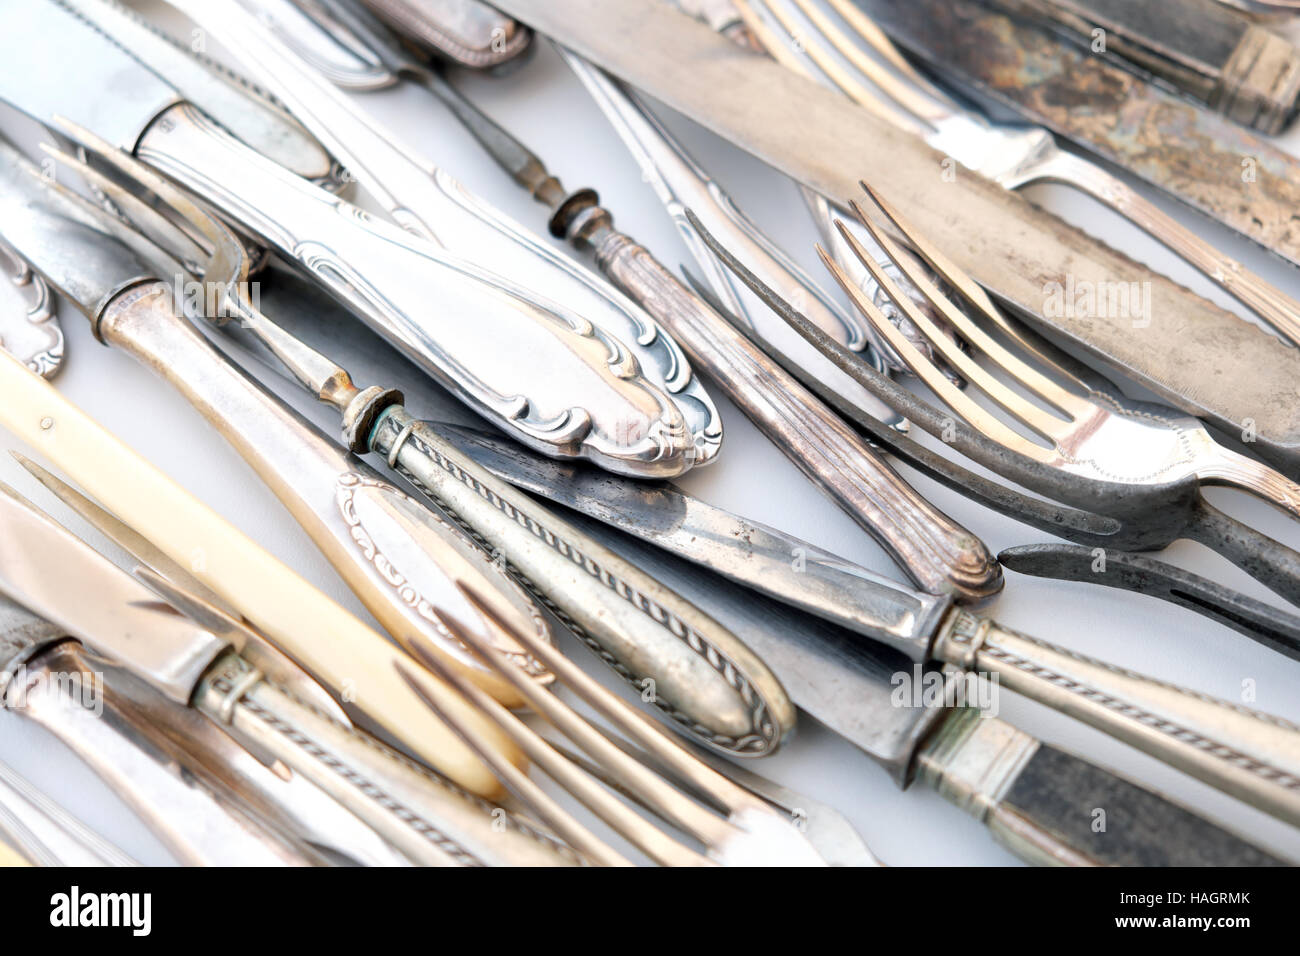 old cutlery, vintage flatware, beautiful silver fork and knife Stock Photo